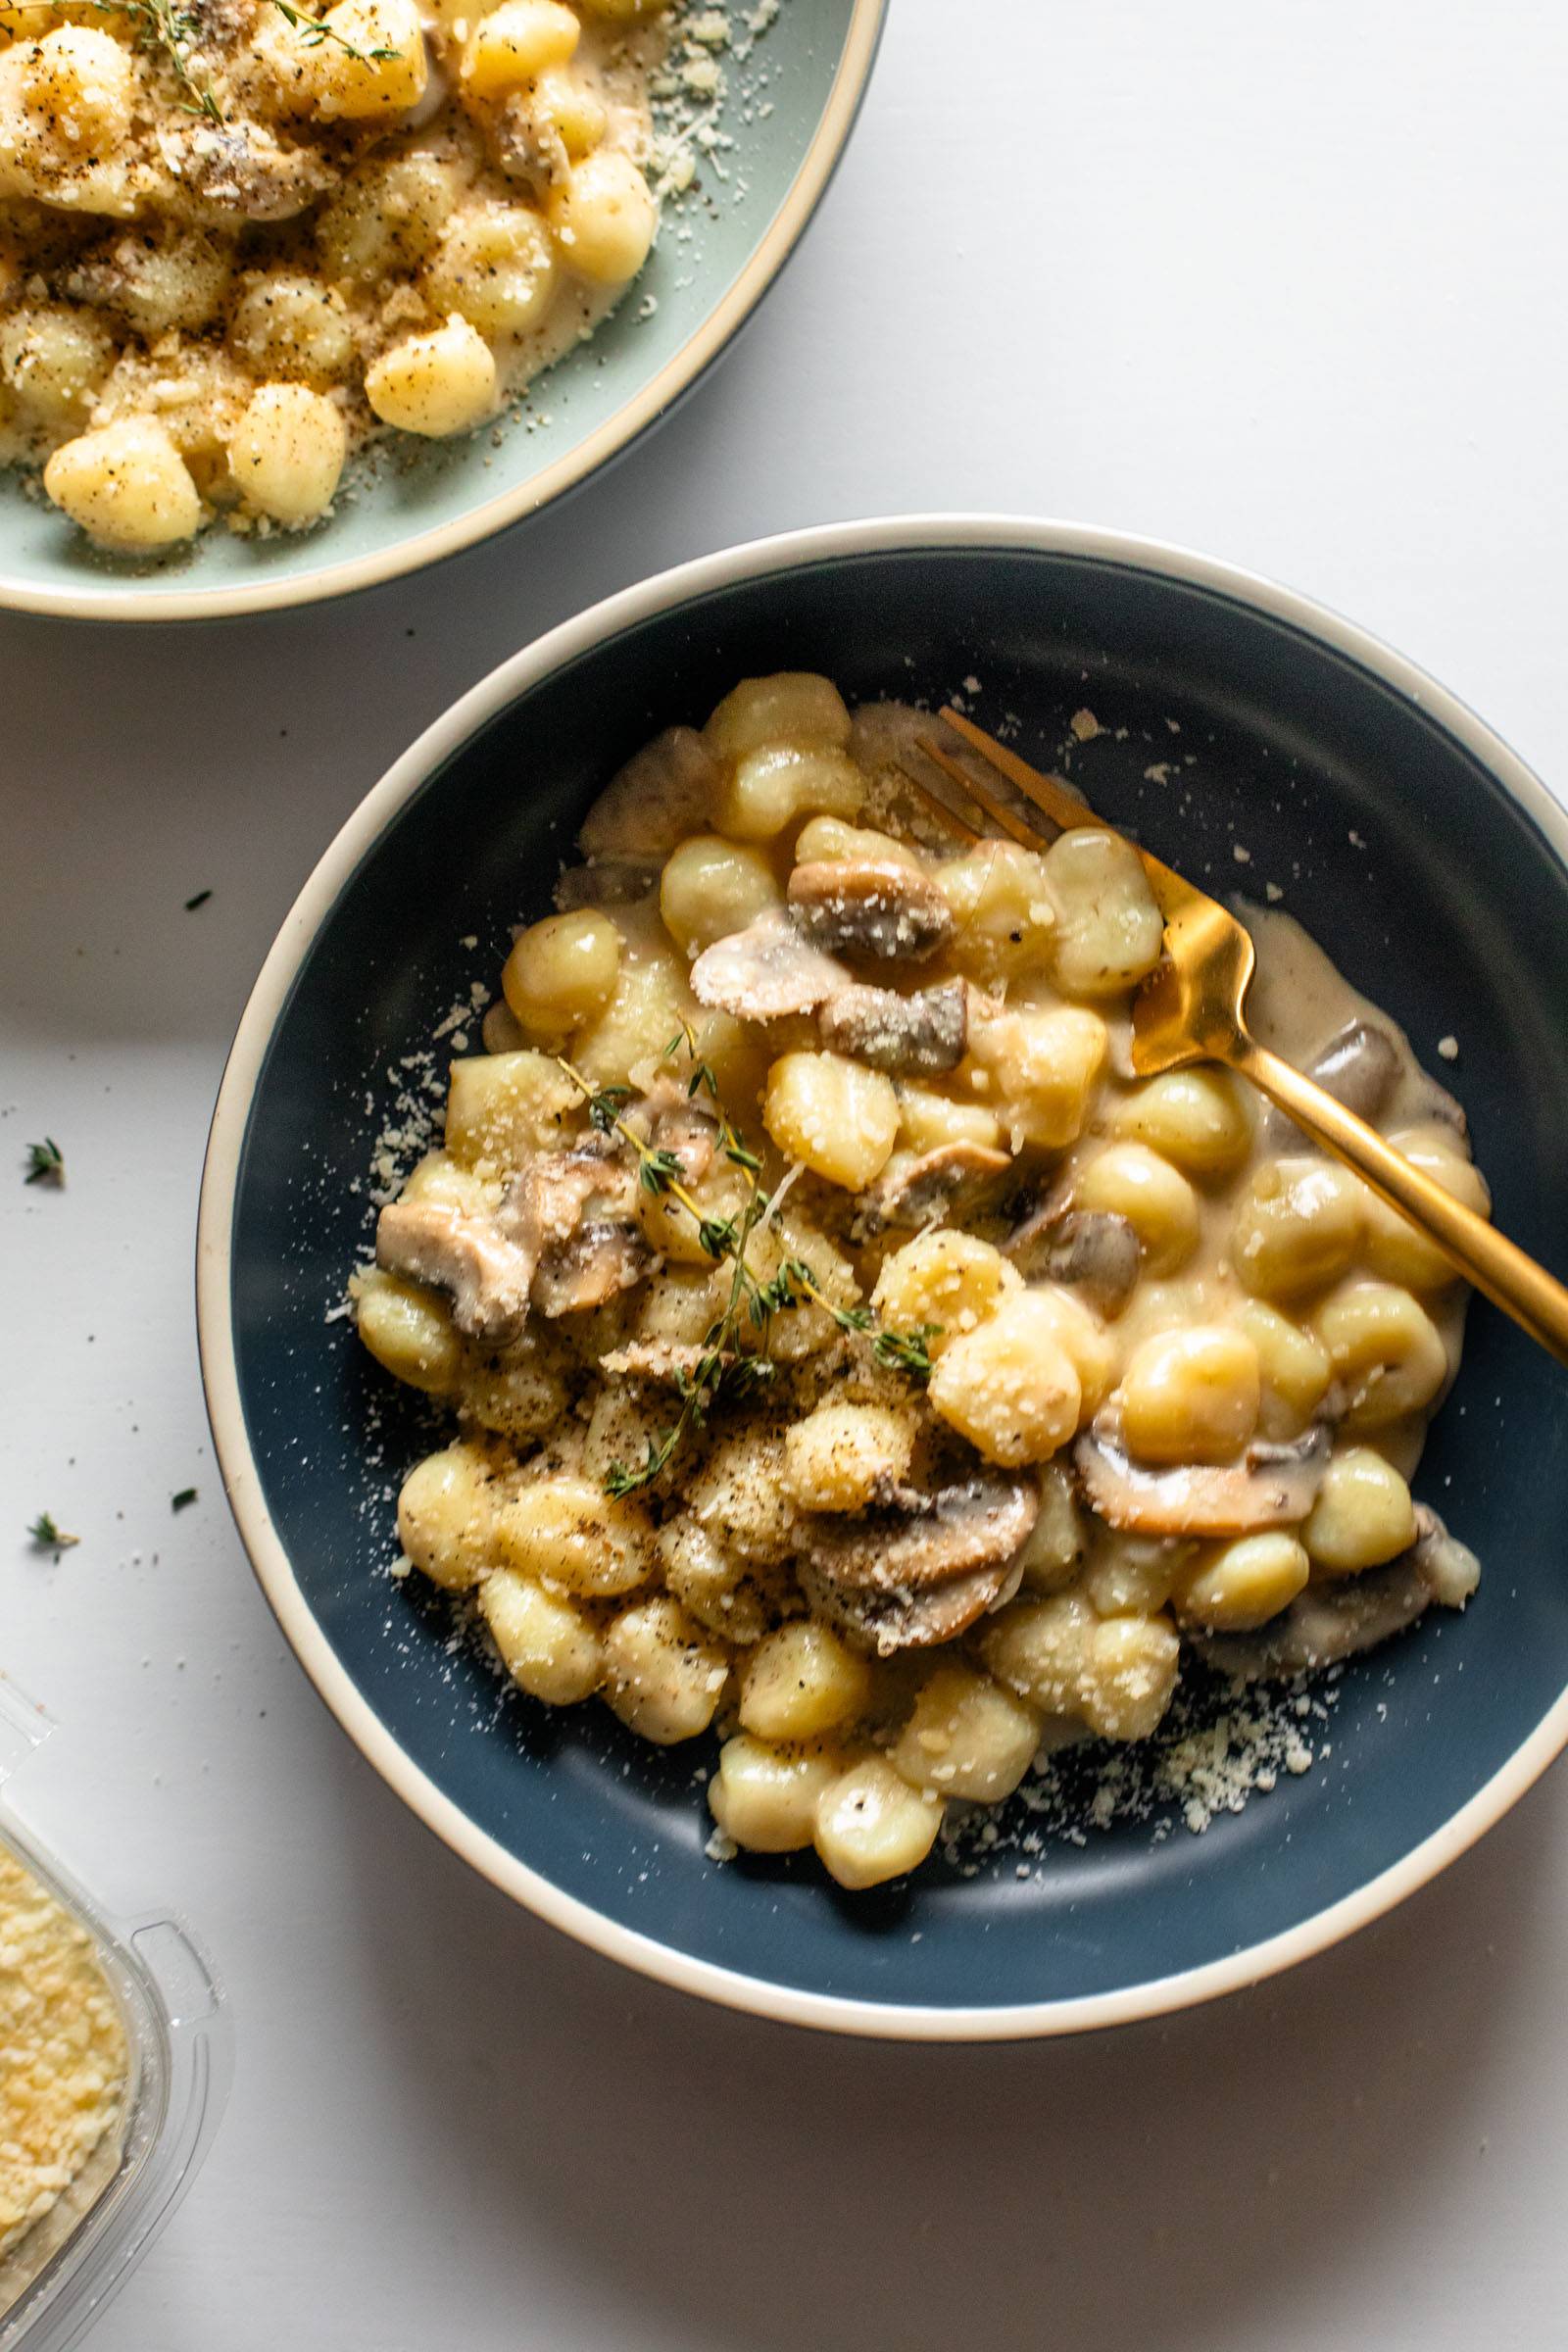 Gnocchi in a creamy mushroom sauce in a bowl with a fork.